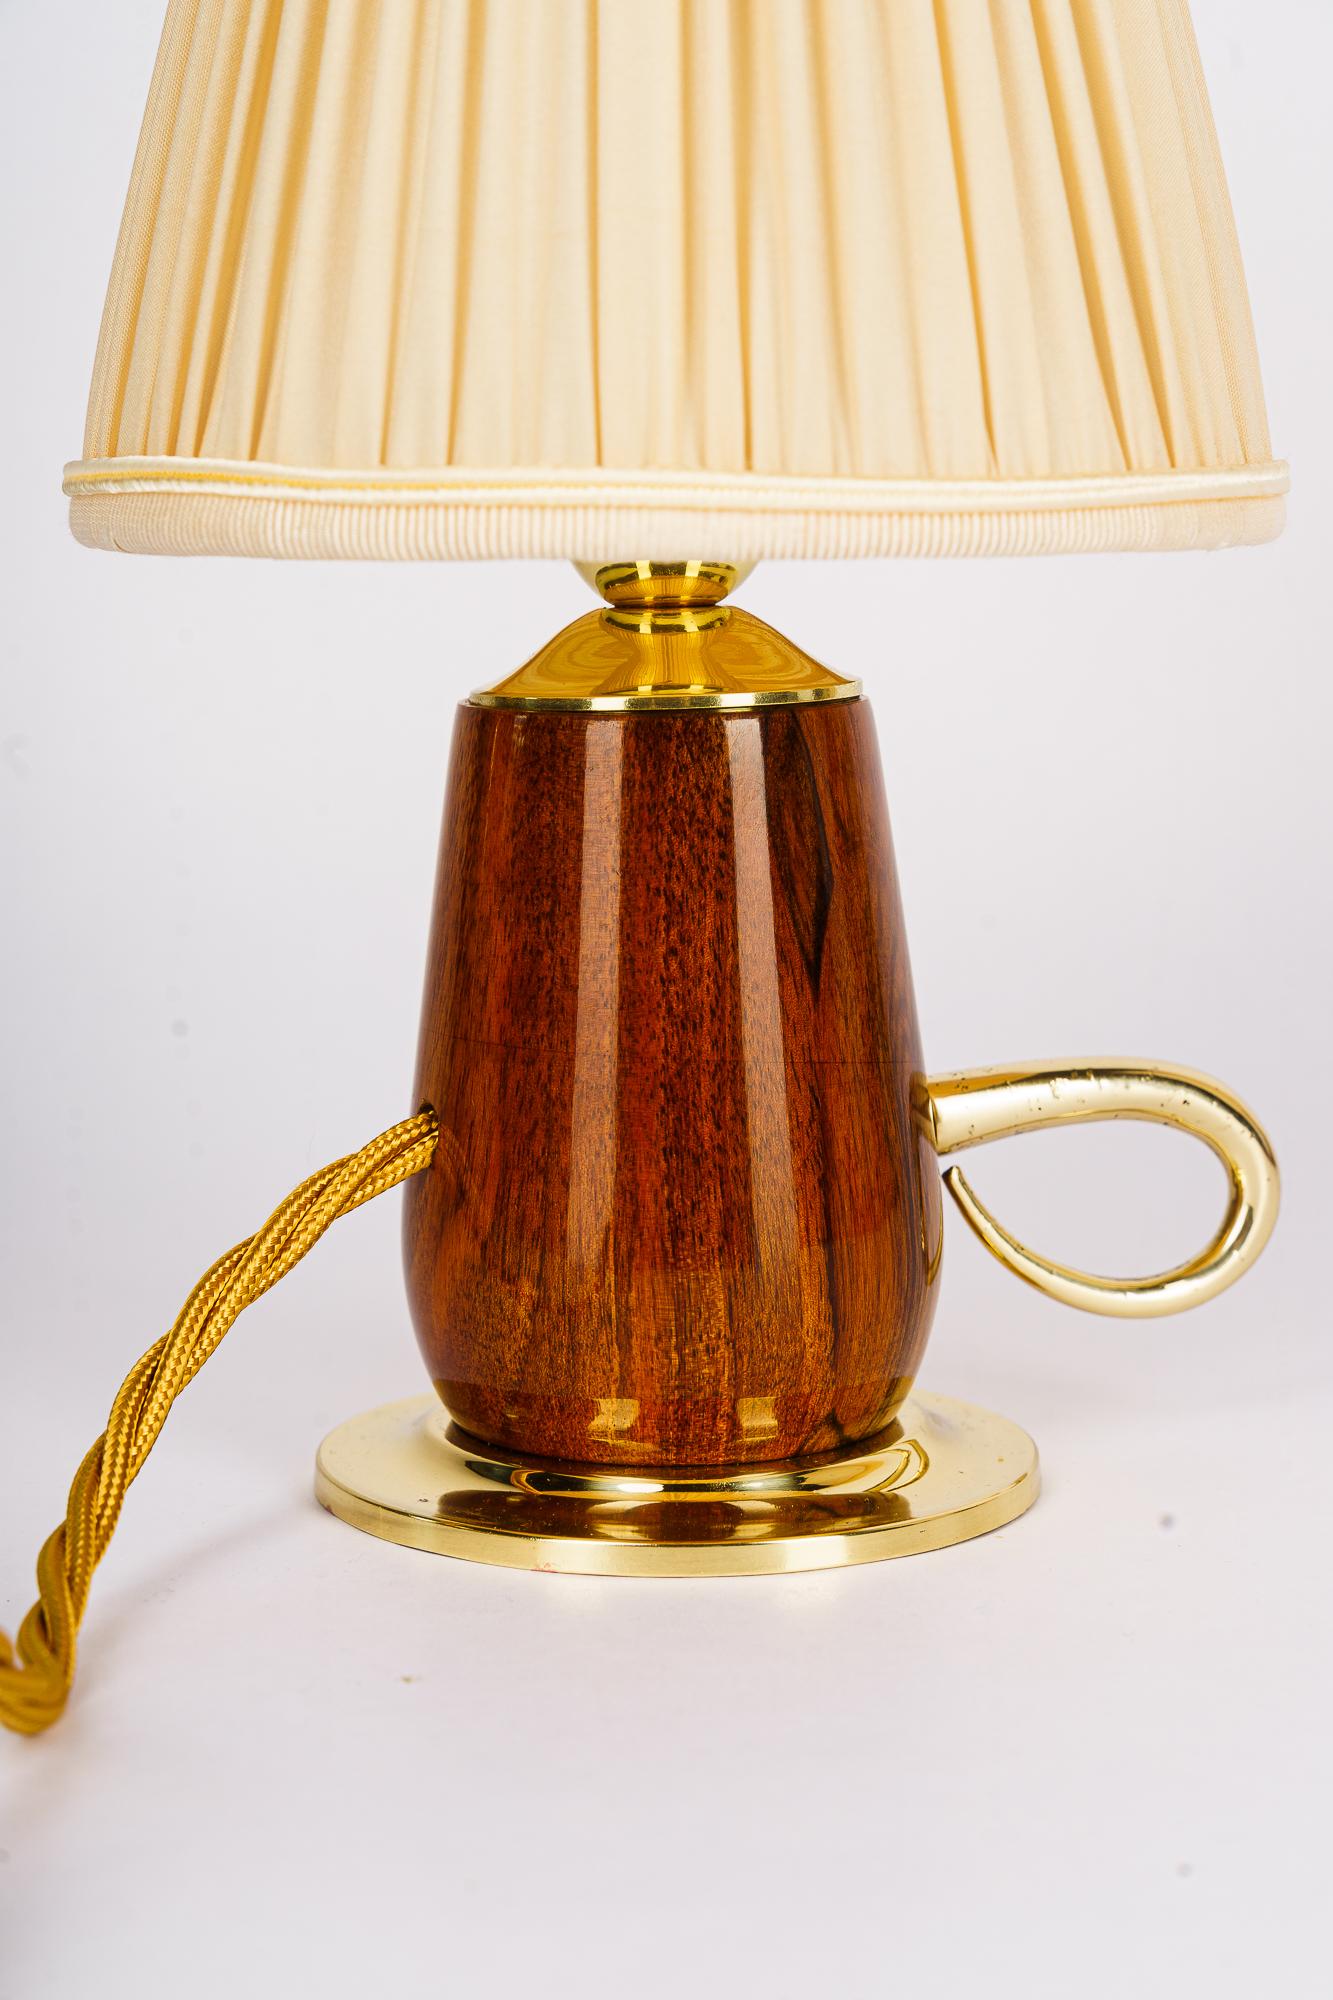 Rupert nikoll cherry wood table lamp with fabric shade vienna around 1950s
Cherry wood polished
Brass parts polished and stove enameled
The fabric shade is replaced ( new )